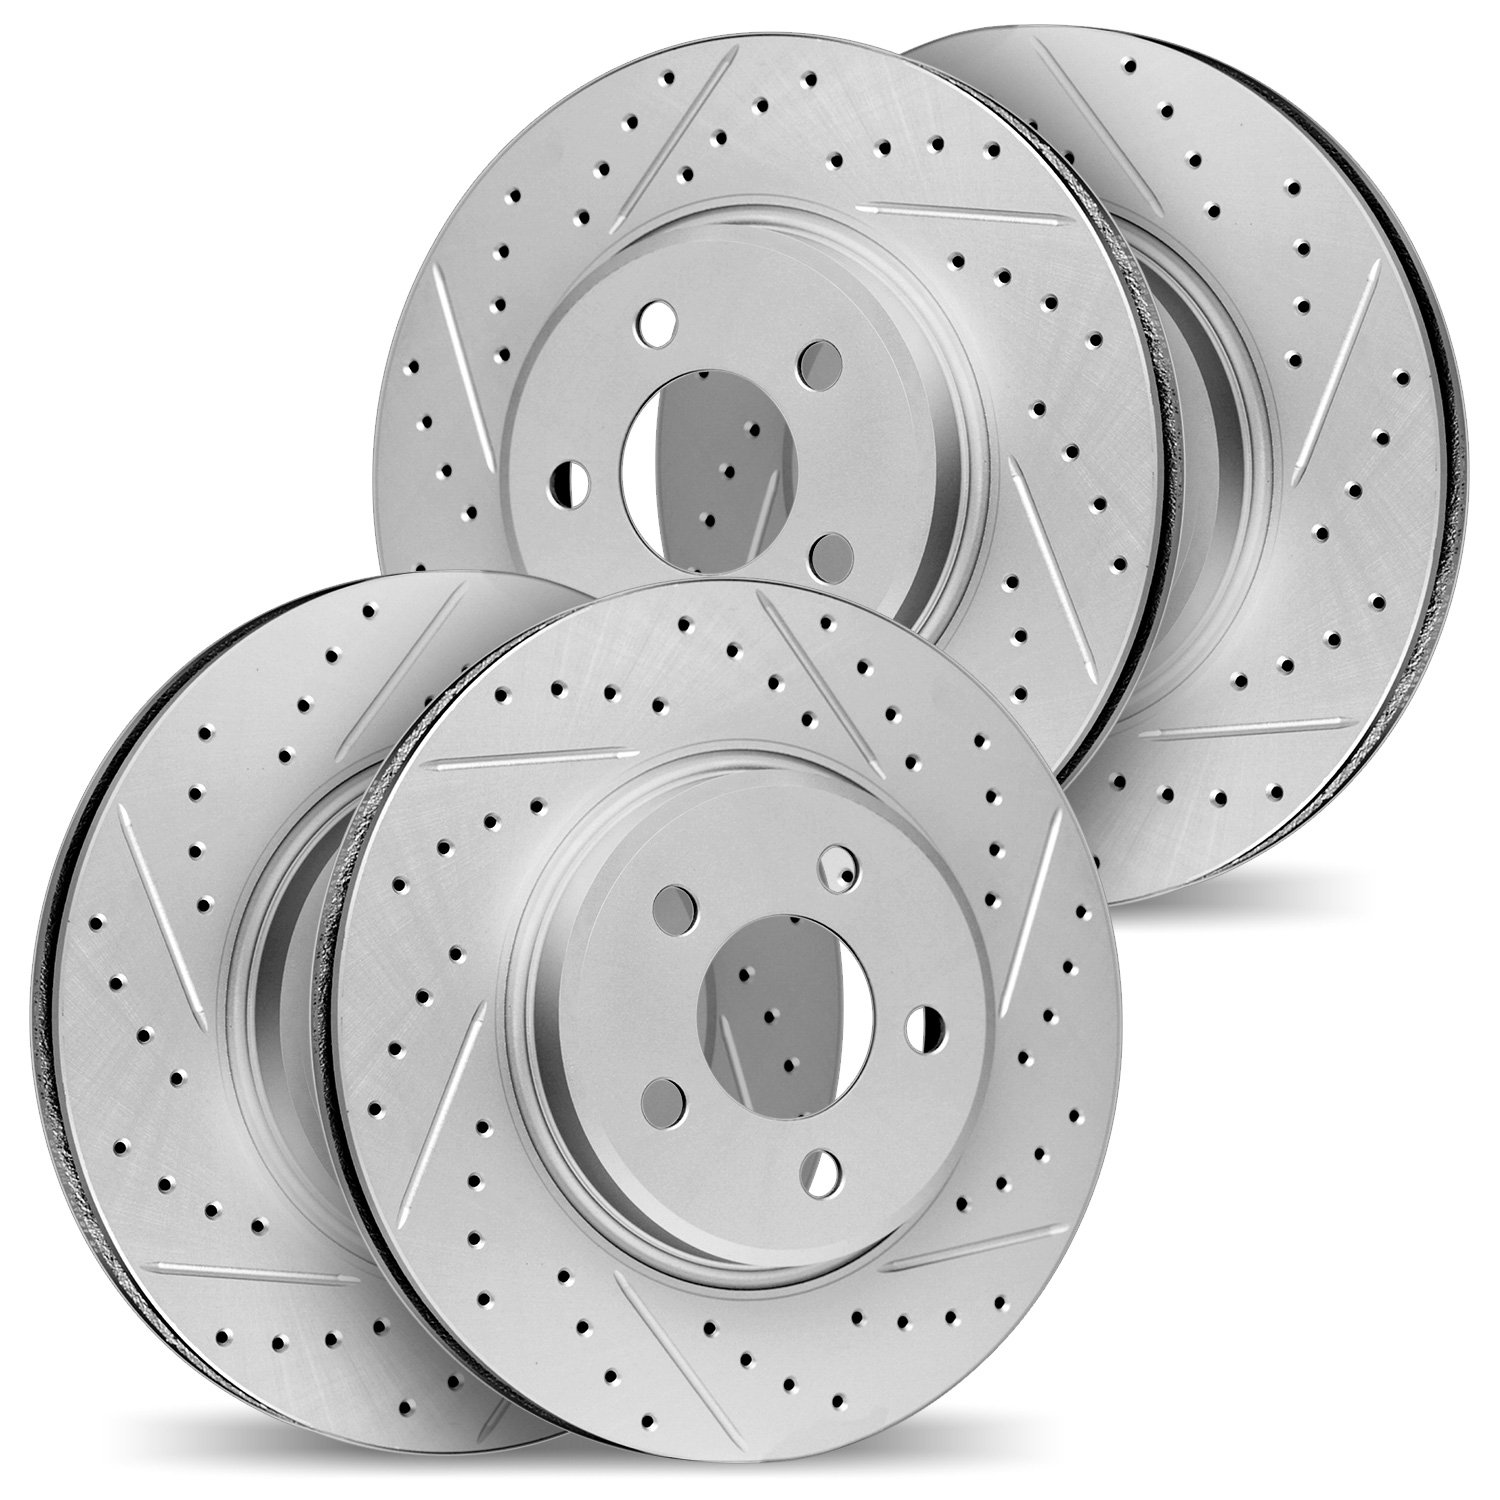 2004-47039 Geoperformance Drilled/Slotted Brake Rotors, 1988-1994 GM, Position: Front and Rear